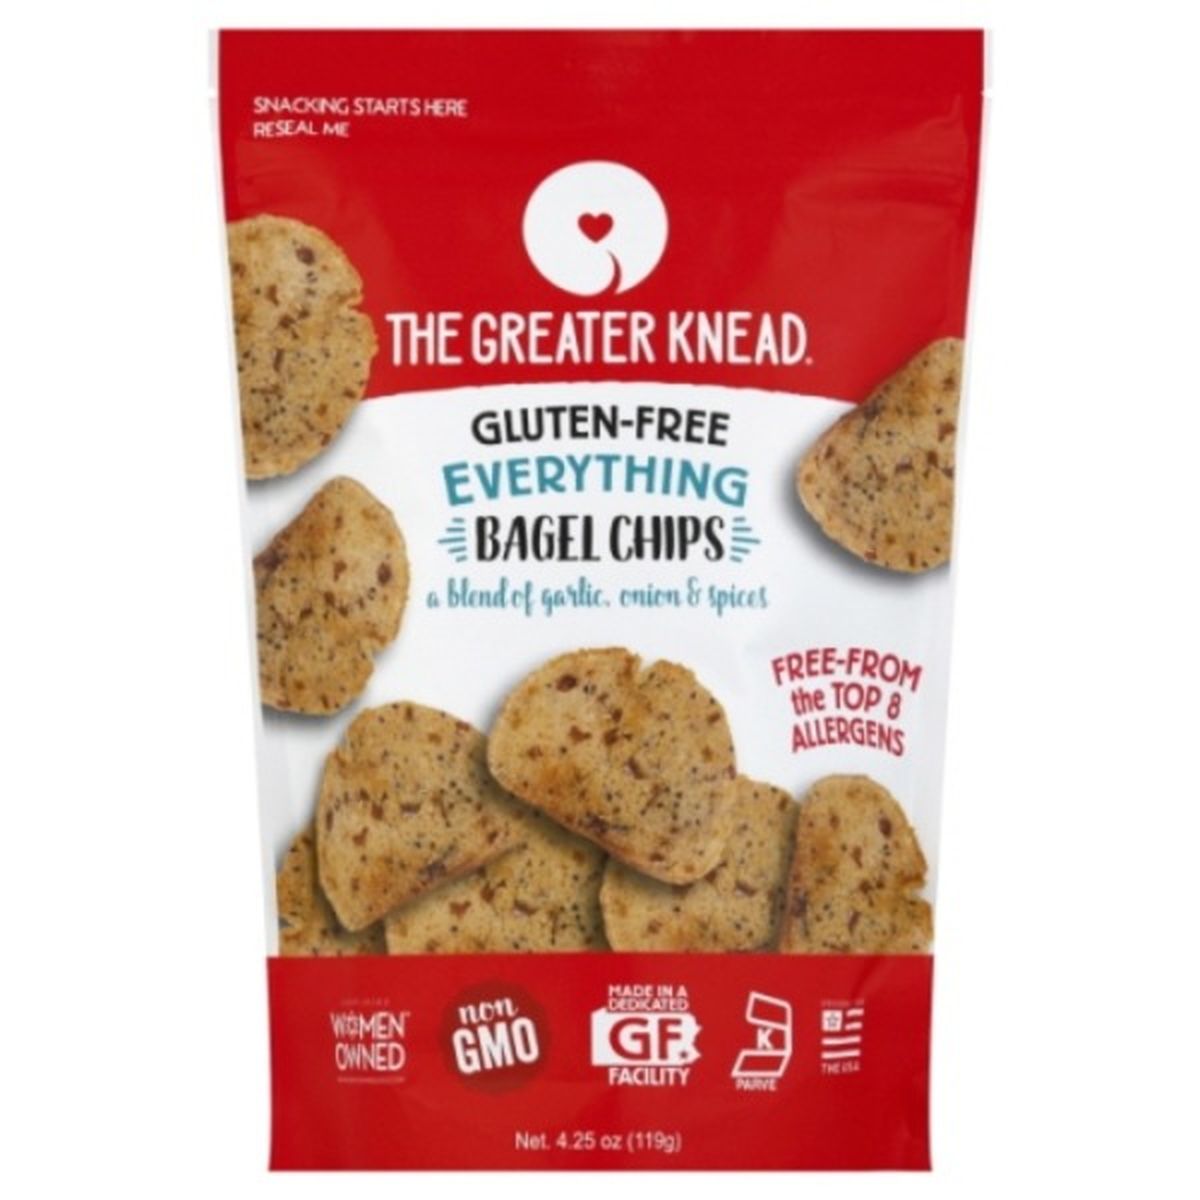 Calories in The Greater Knead Bagel Chips, Gluten-Free, Everything